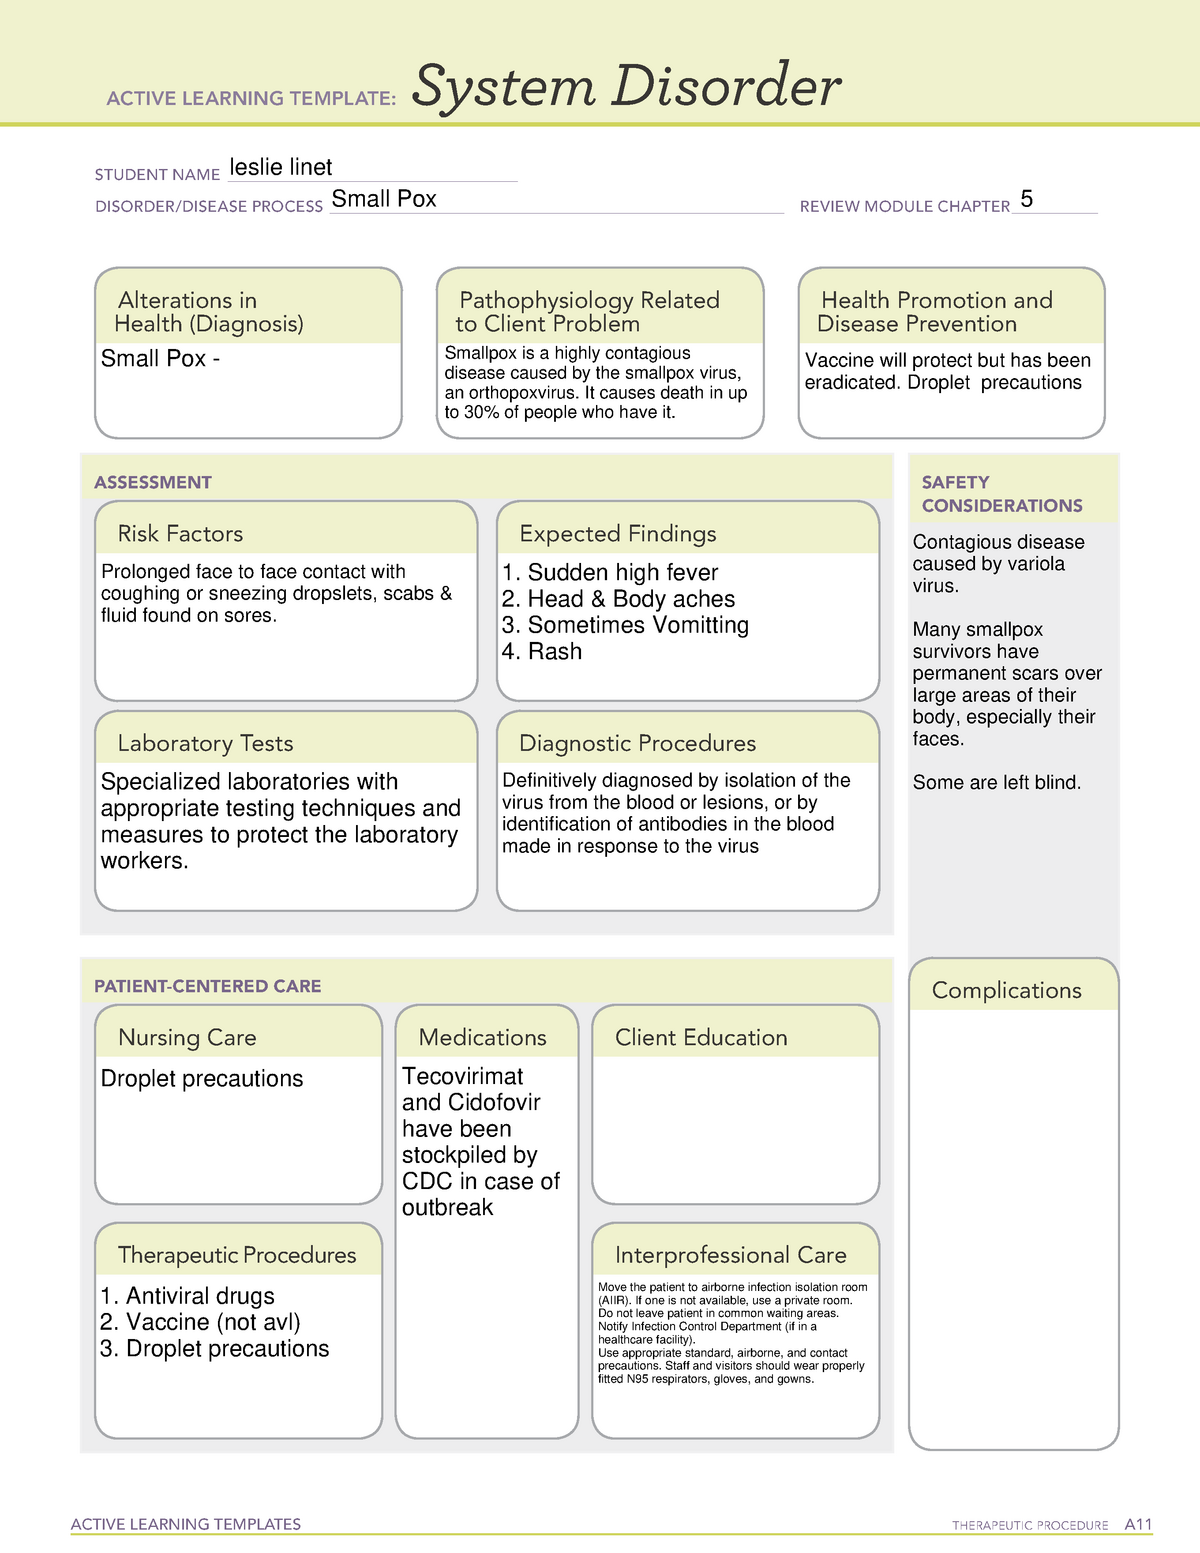 Leader Small Pox assignments for ati ACTIVE LEARNING TEMPLATE System